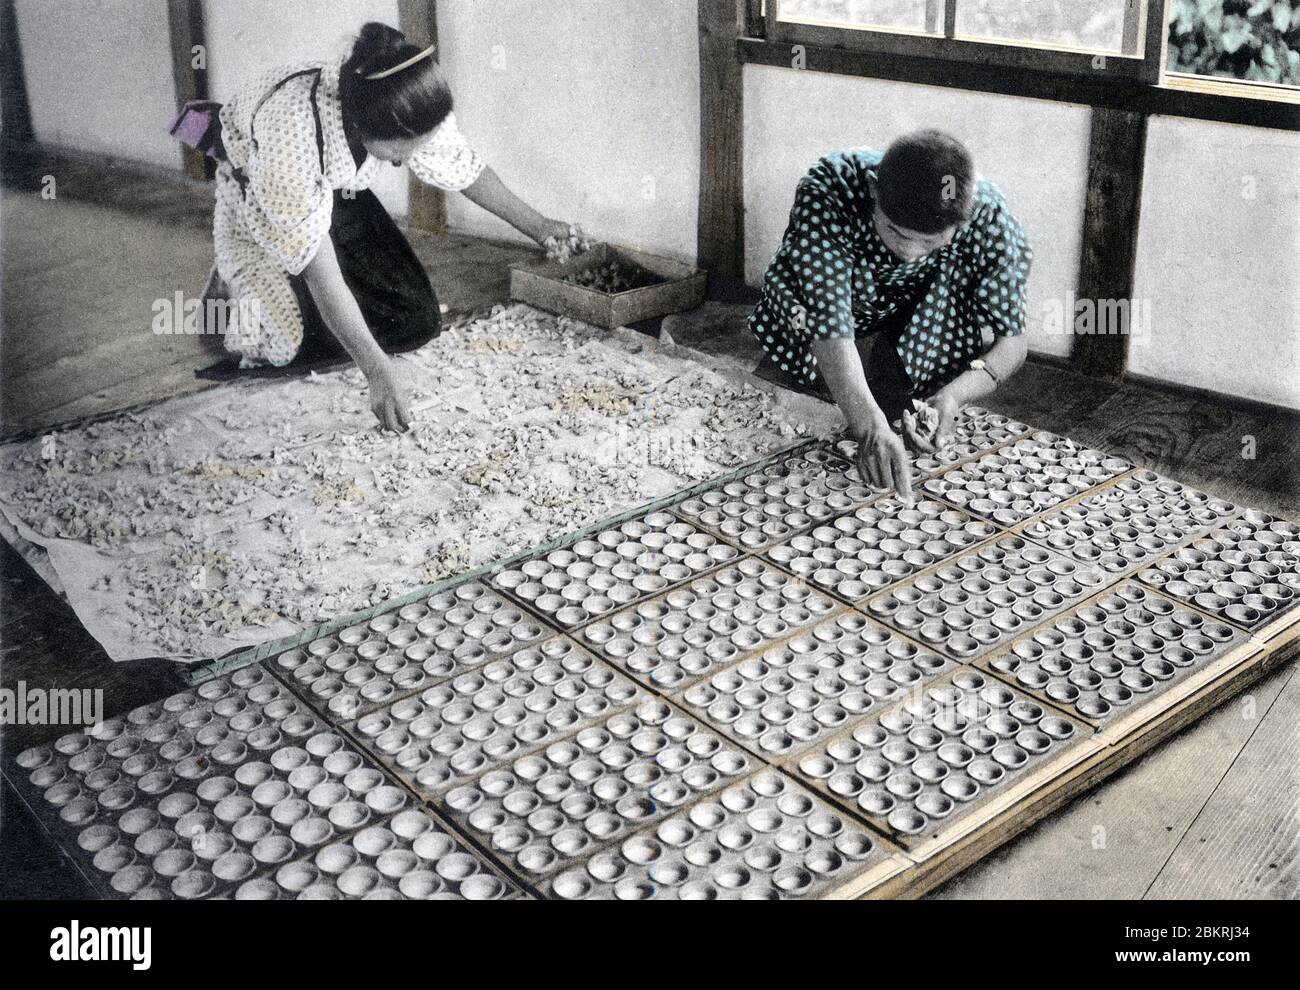 [ 1910s Japan - Japanese Silk Farming ] —   Silk moths depositing silkworms eggs on specially prepared silkworm egg cards. Each silk moth lays hundreds of eggs as tiny as a pinhead. These are divided into diseased eggs (which are discarded), eggs for reproduction and eggs for production of cocoons.  This is Image 14 of 17 of 'The Silk Industry of Japan,' a book published by Tokyo based Ueda.  20th century vintage collotype print. Stock Photo